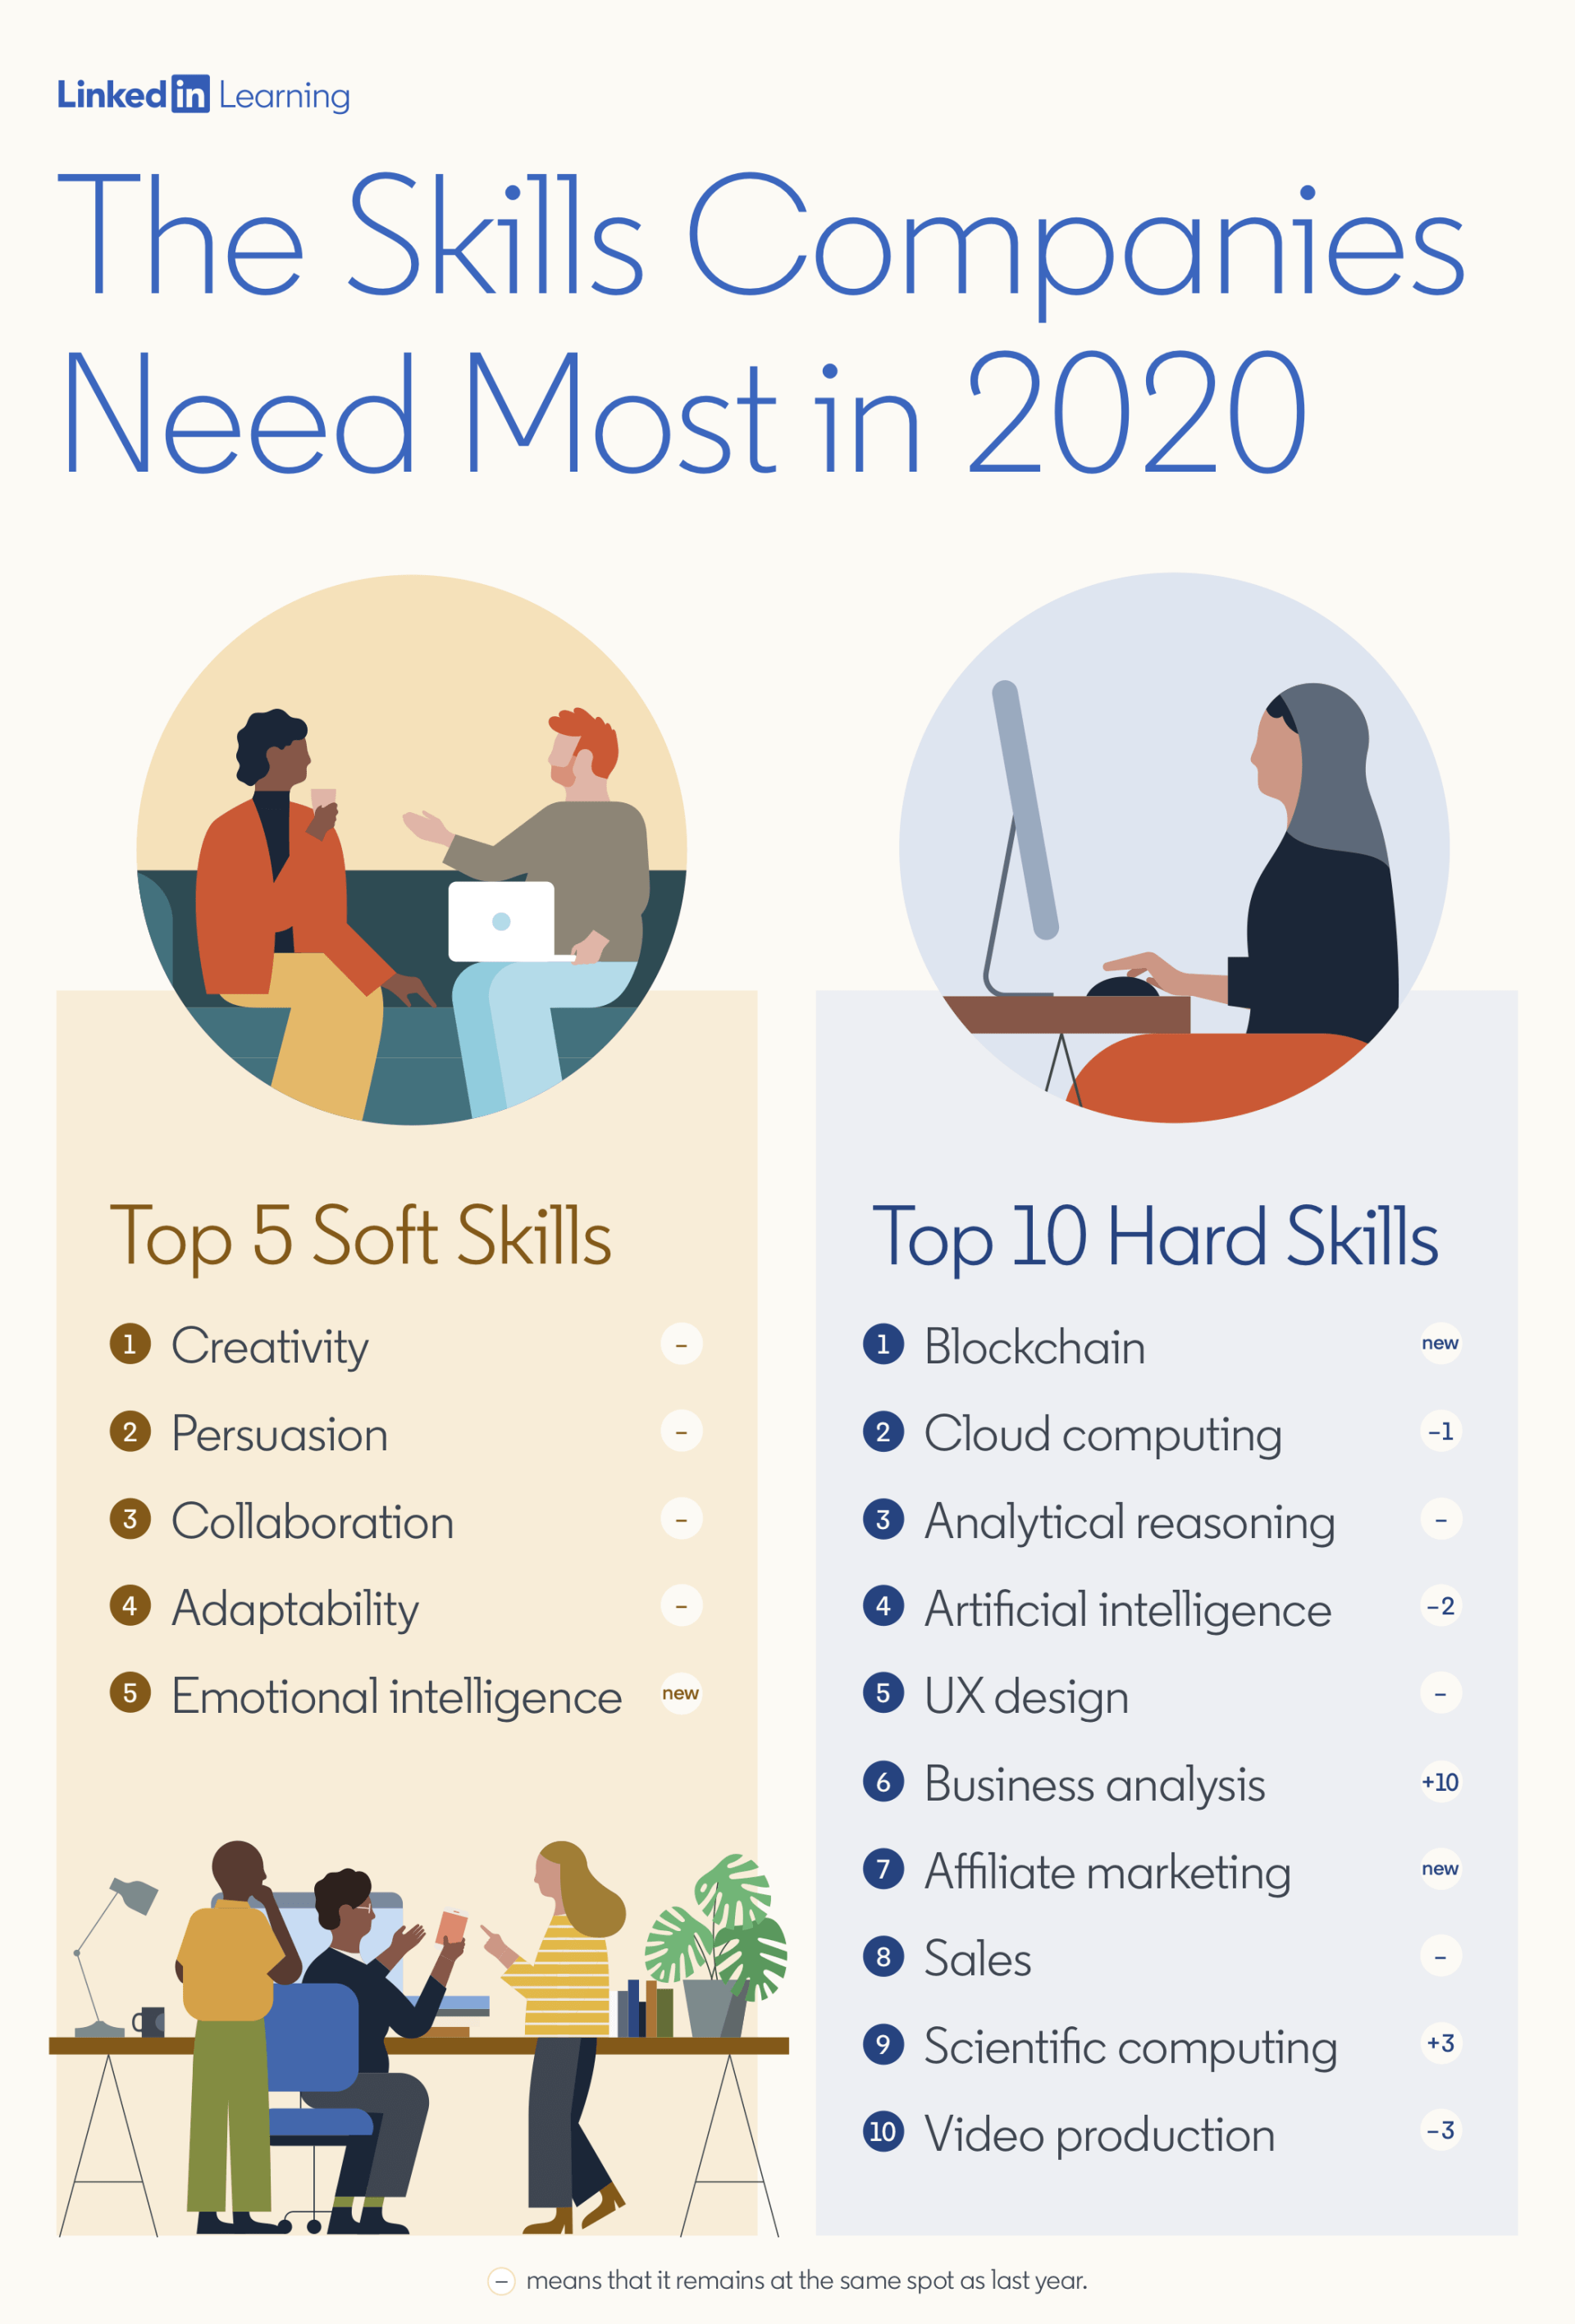 The skills companies need most